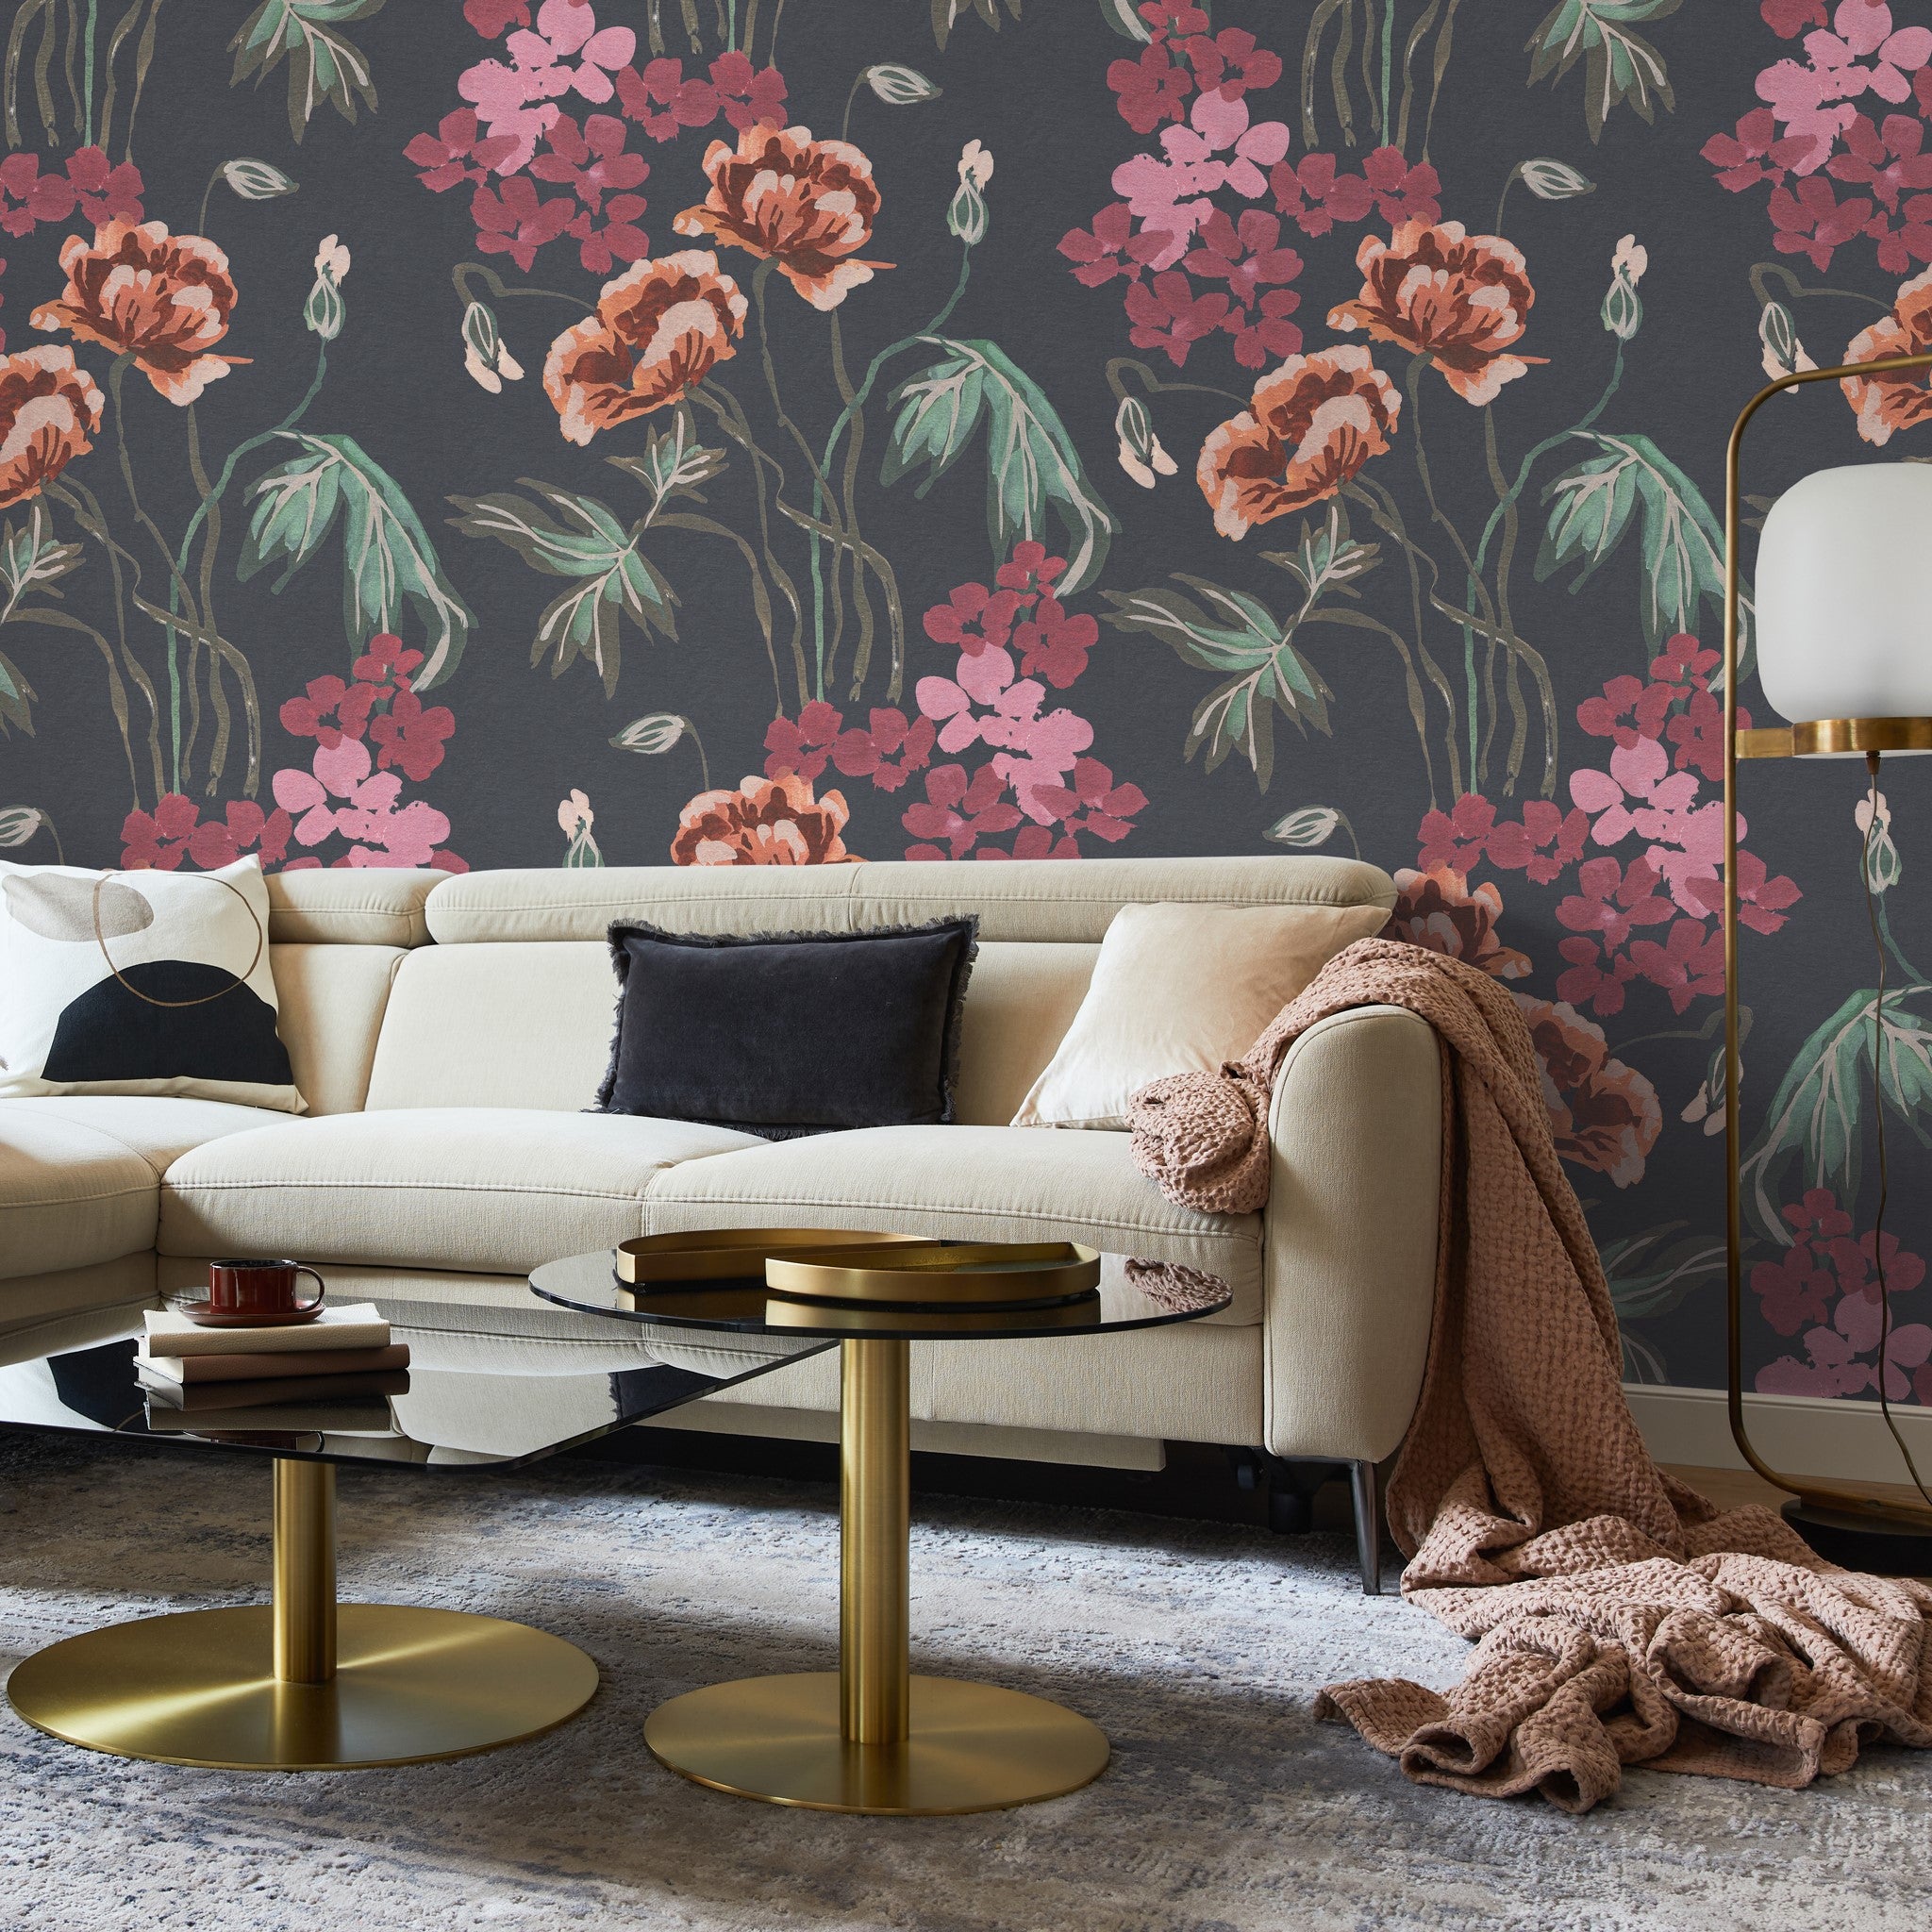 "Bloom Wild Wallpaper by Wall Blush enhancing a cozy living room, with focus on elegant floral patterns."